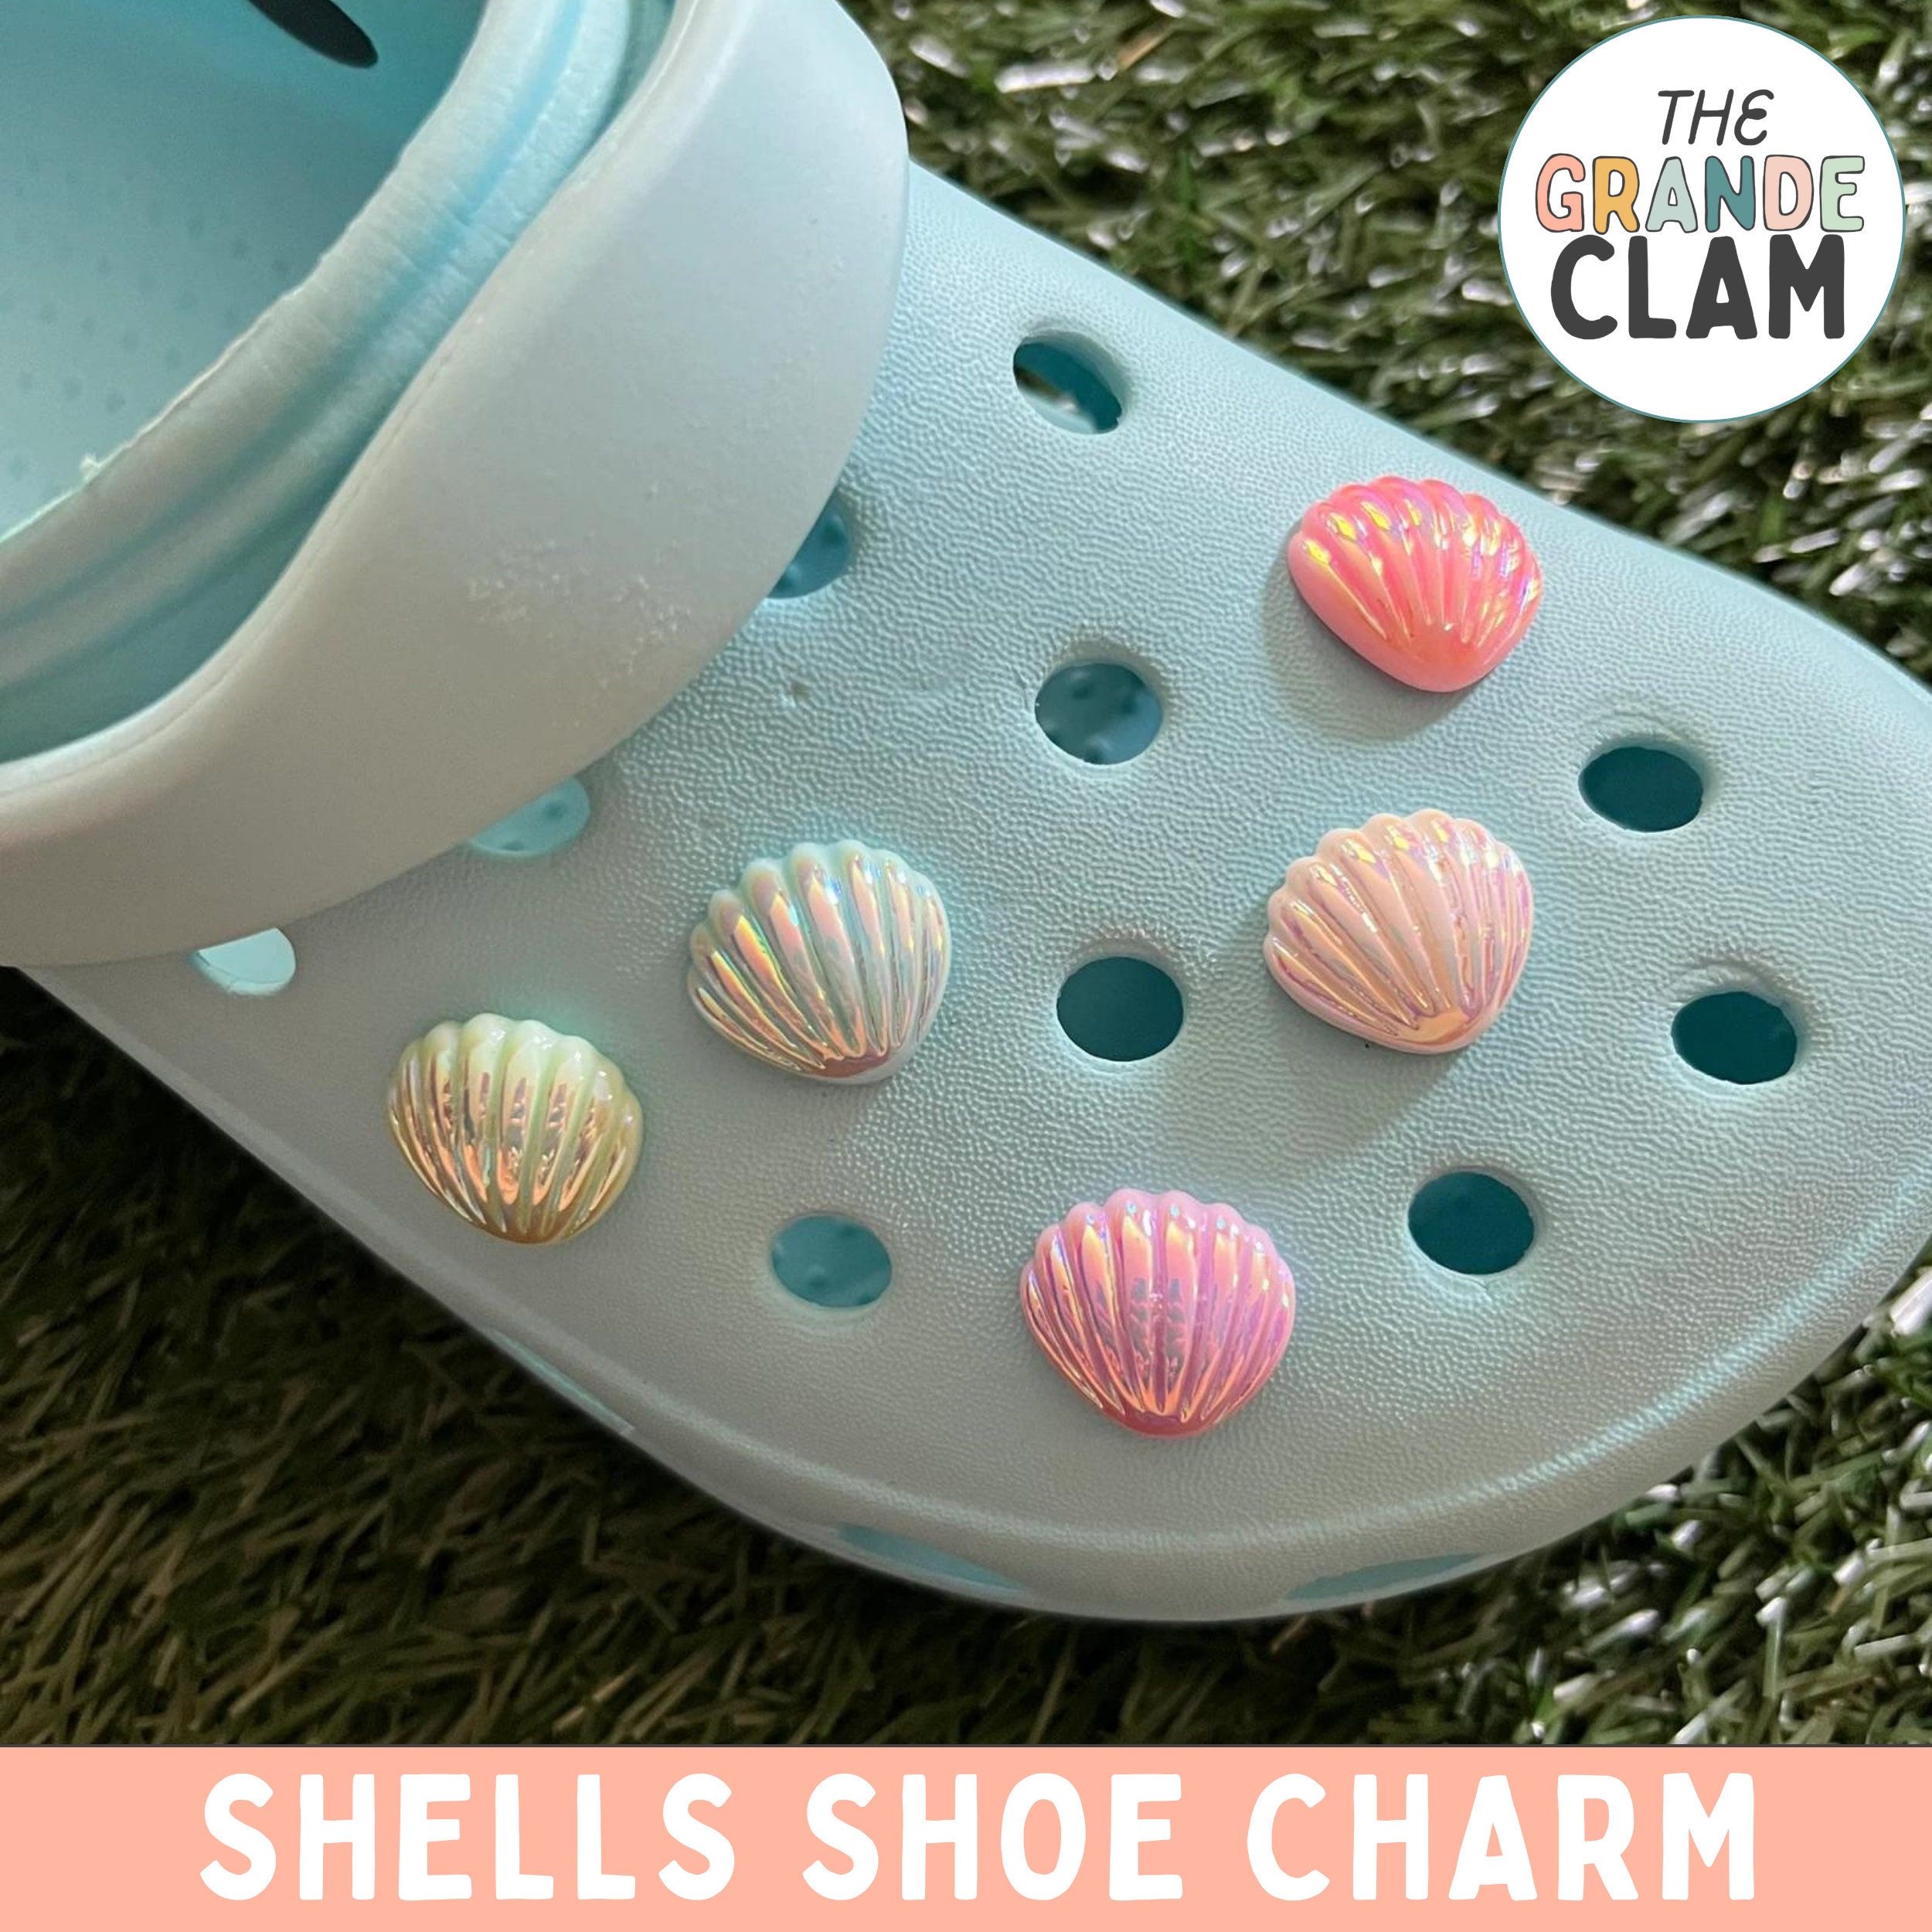 Shell Simulation DIY Bling Handmade Shoes Canvas Ocean Theme Kids High Top  Pearls Sneakers For Girl